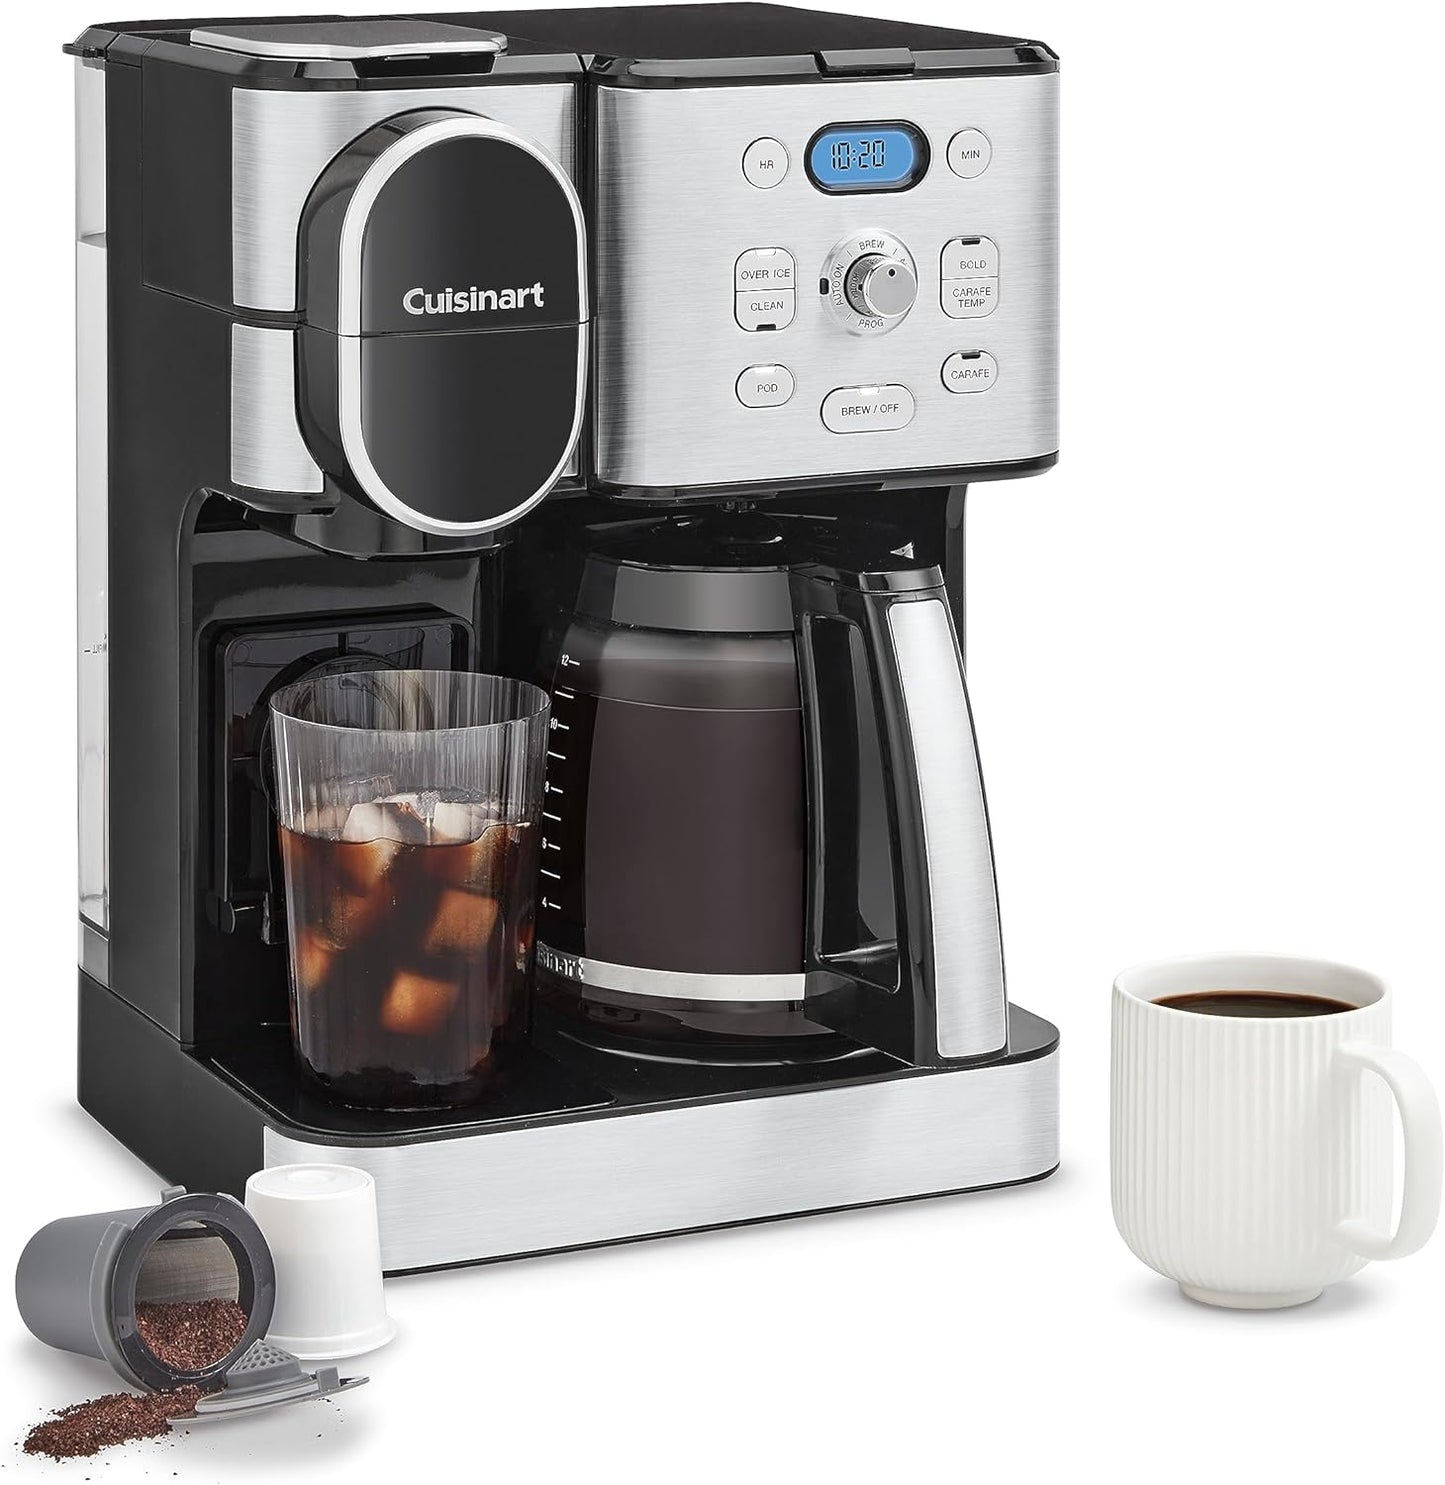 Cuisinart Coffee Maker, 12-Cup Glass Carafe, Automatic Hot & Iced Coffee Maker, Single Server Brewer, Stainless Steel